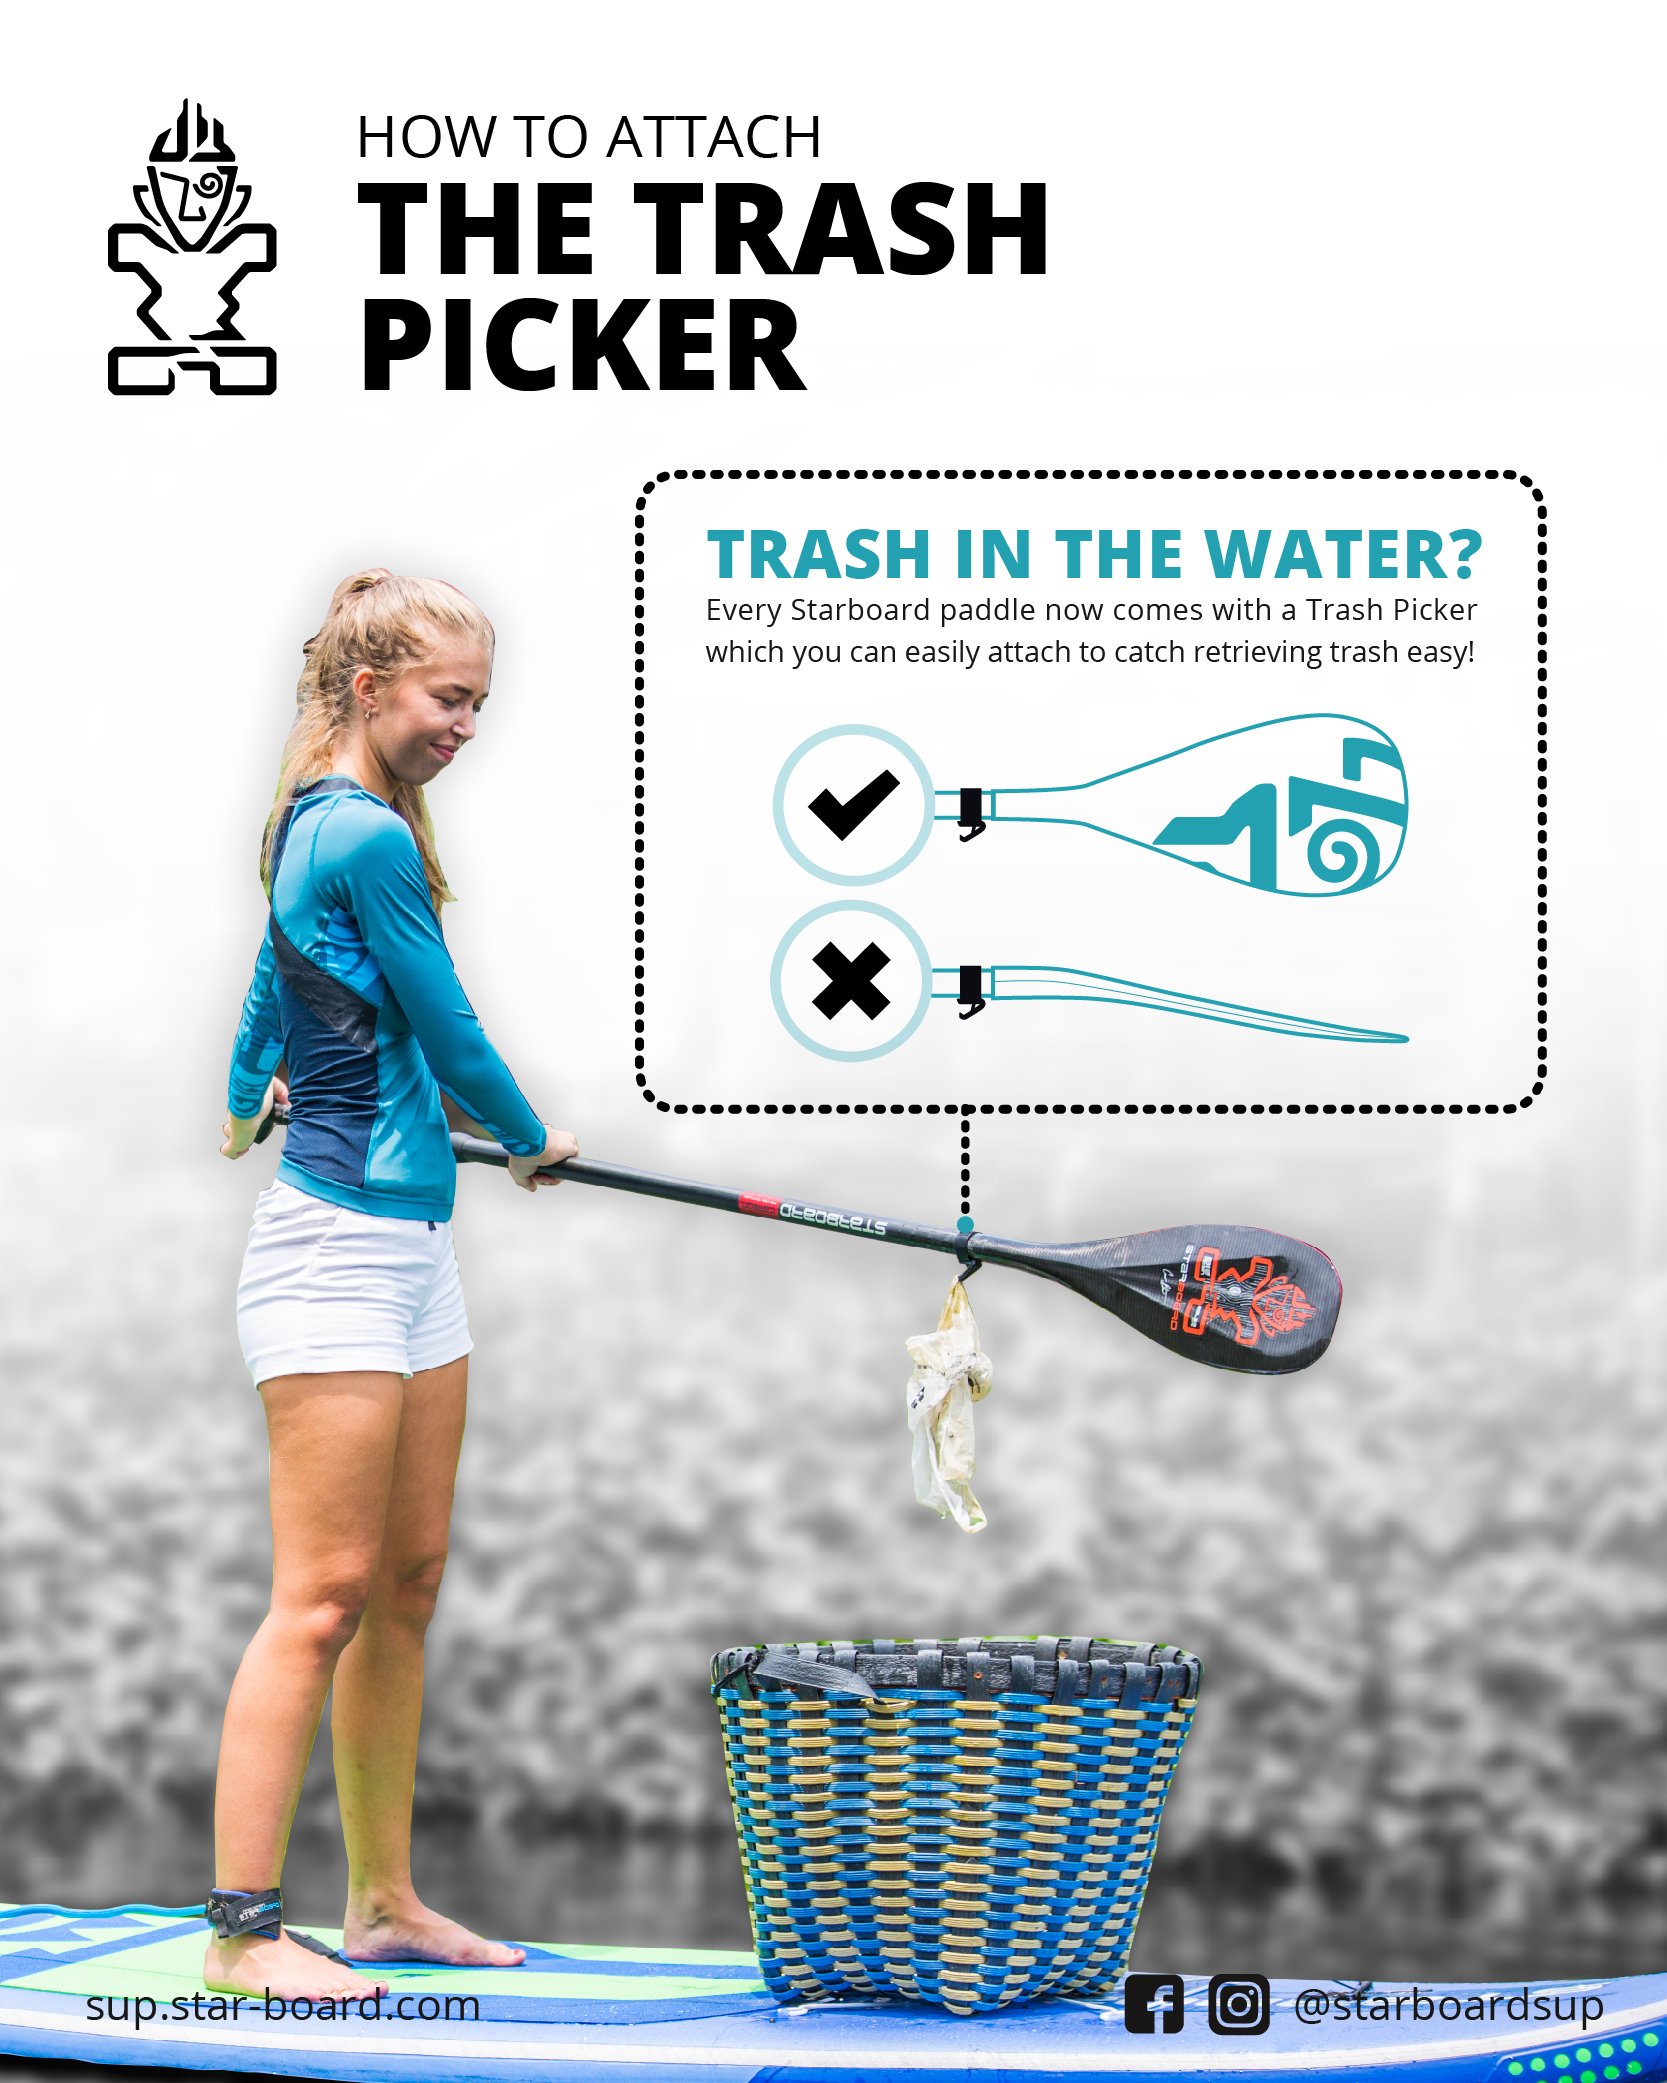 Starboard-SUP-Stand-Up-Paddle-boarding-How-to-attach-trash-picker.jpg